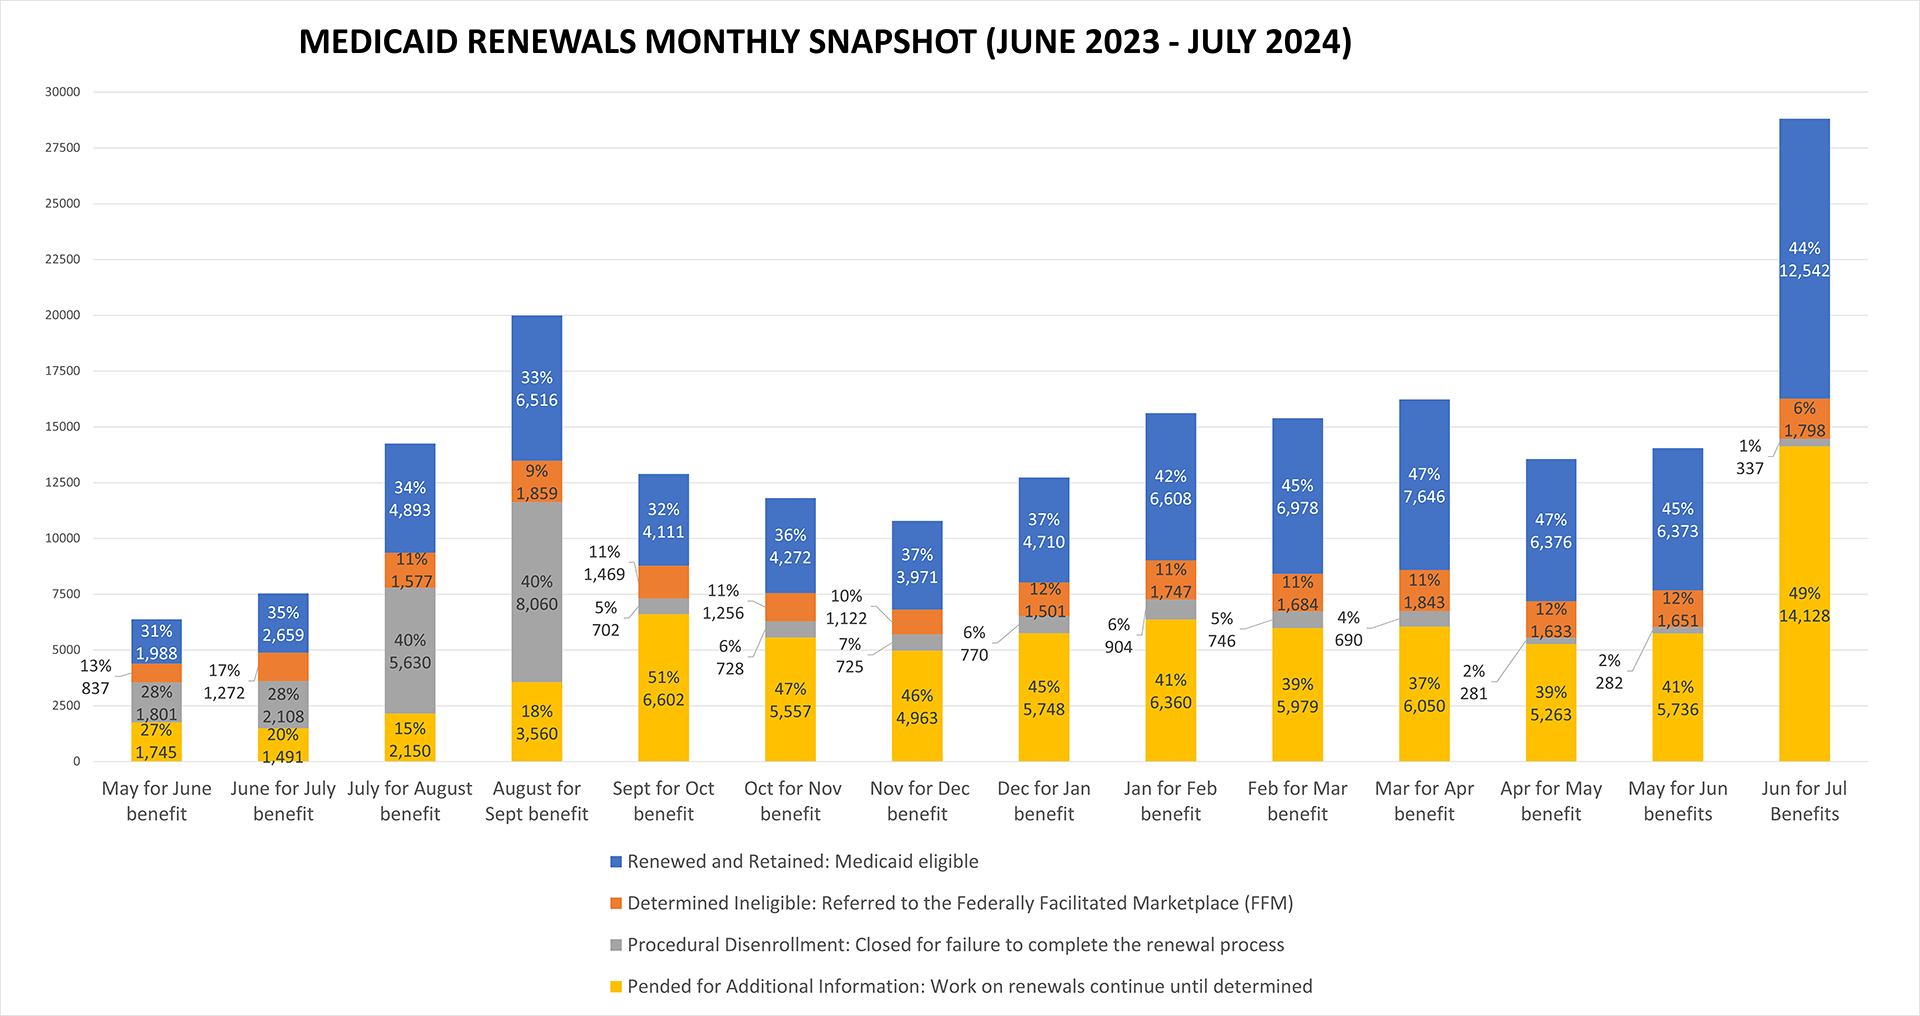 Medicaid Renewals Monthly Snapshot. Click for full size. Data replicated in archive section at the bottom of this page.